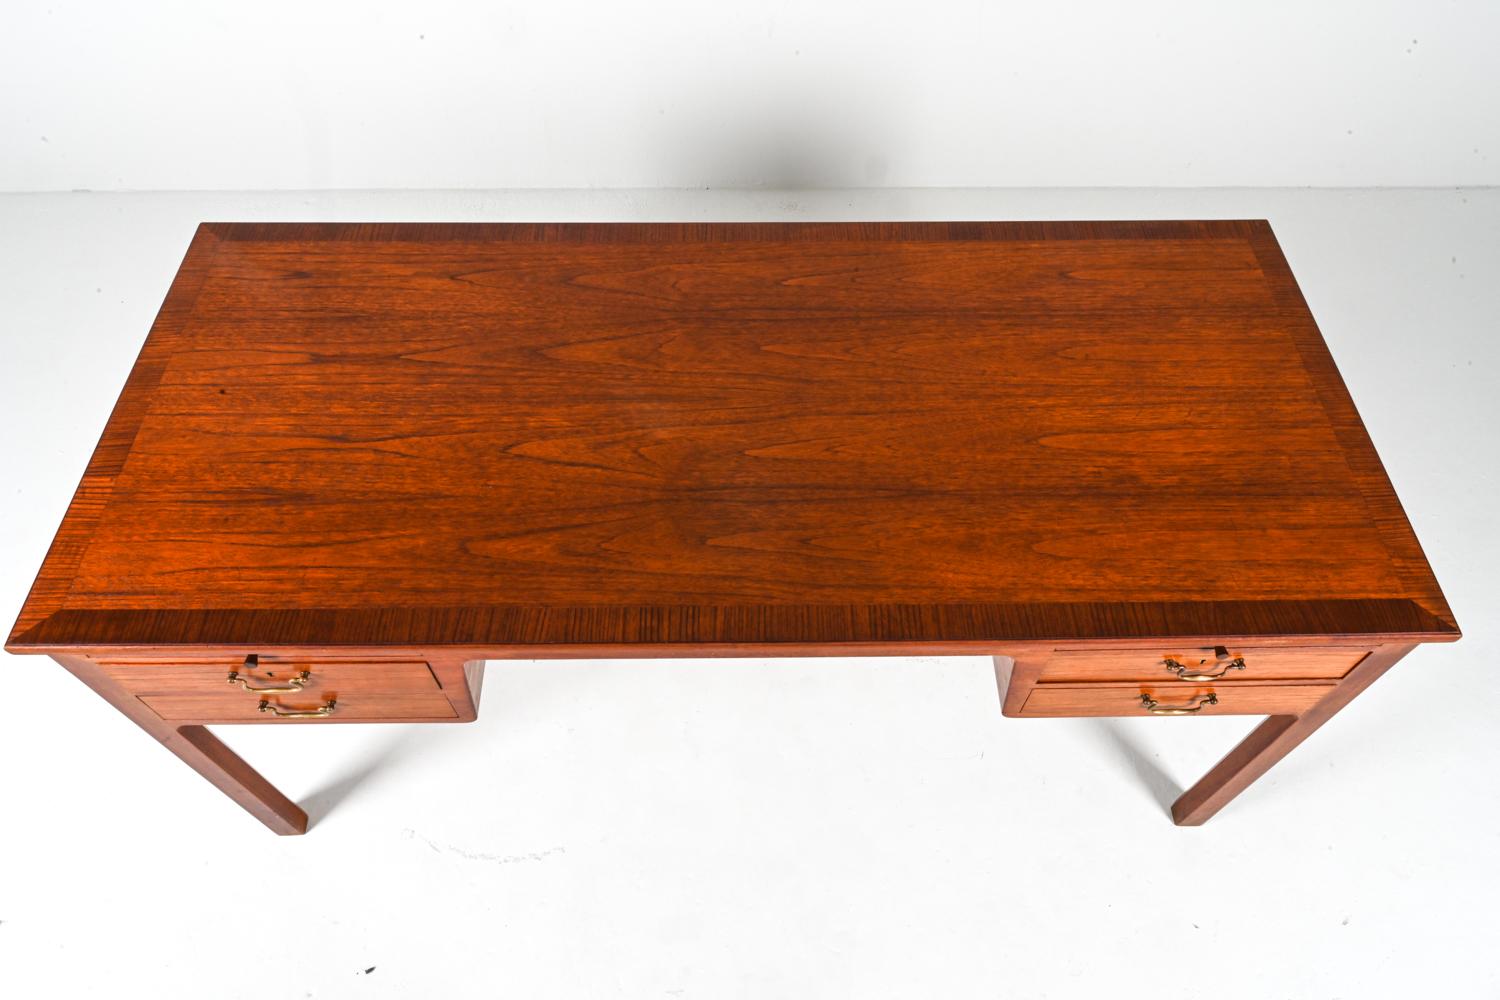 20th Century Danish Mahogany Executive Writing Desk by Ole Wanscher, c. 1950's For Sale